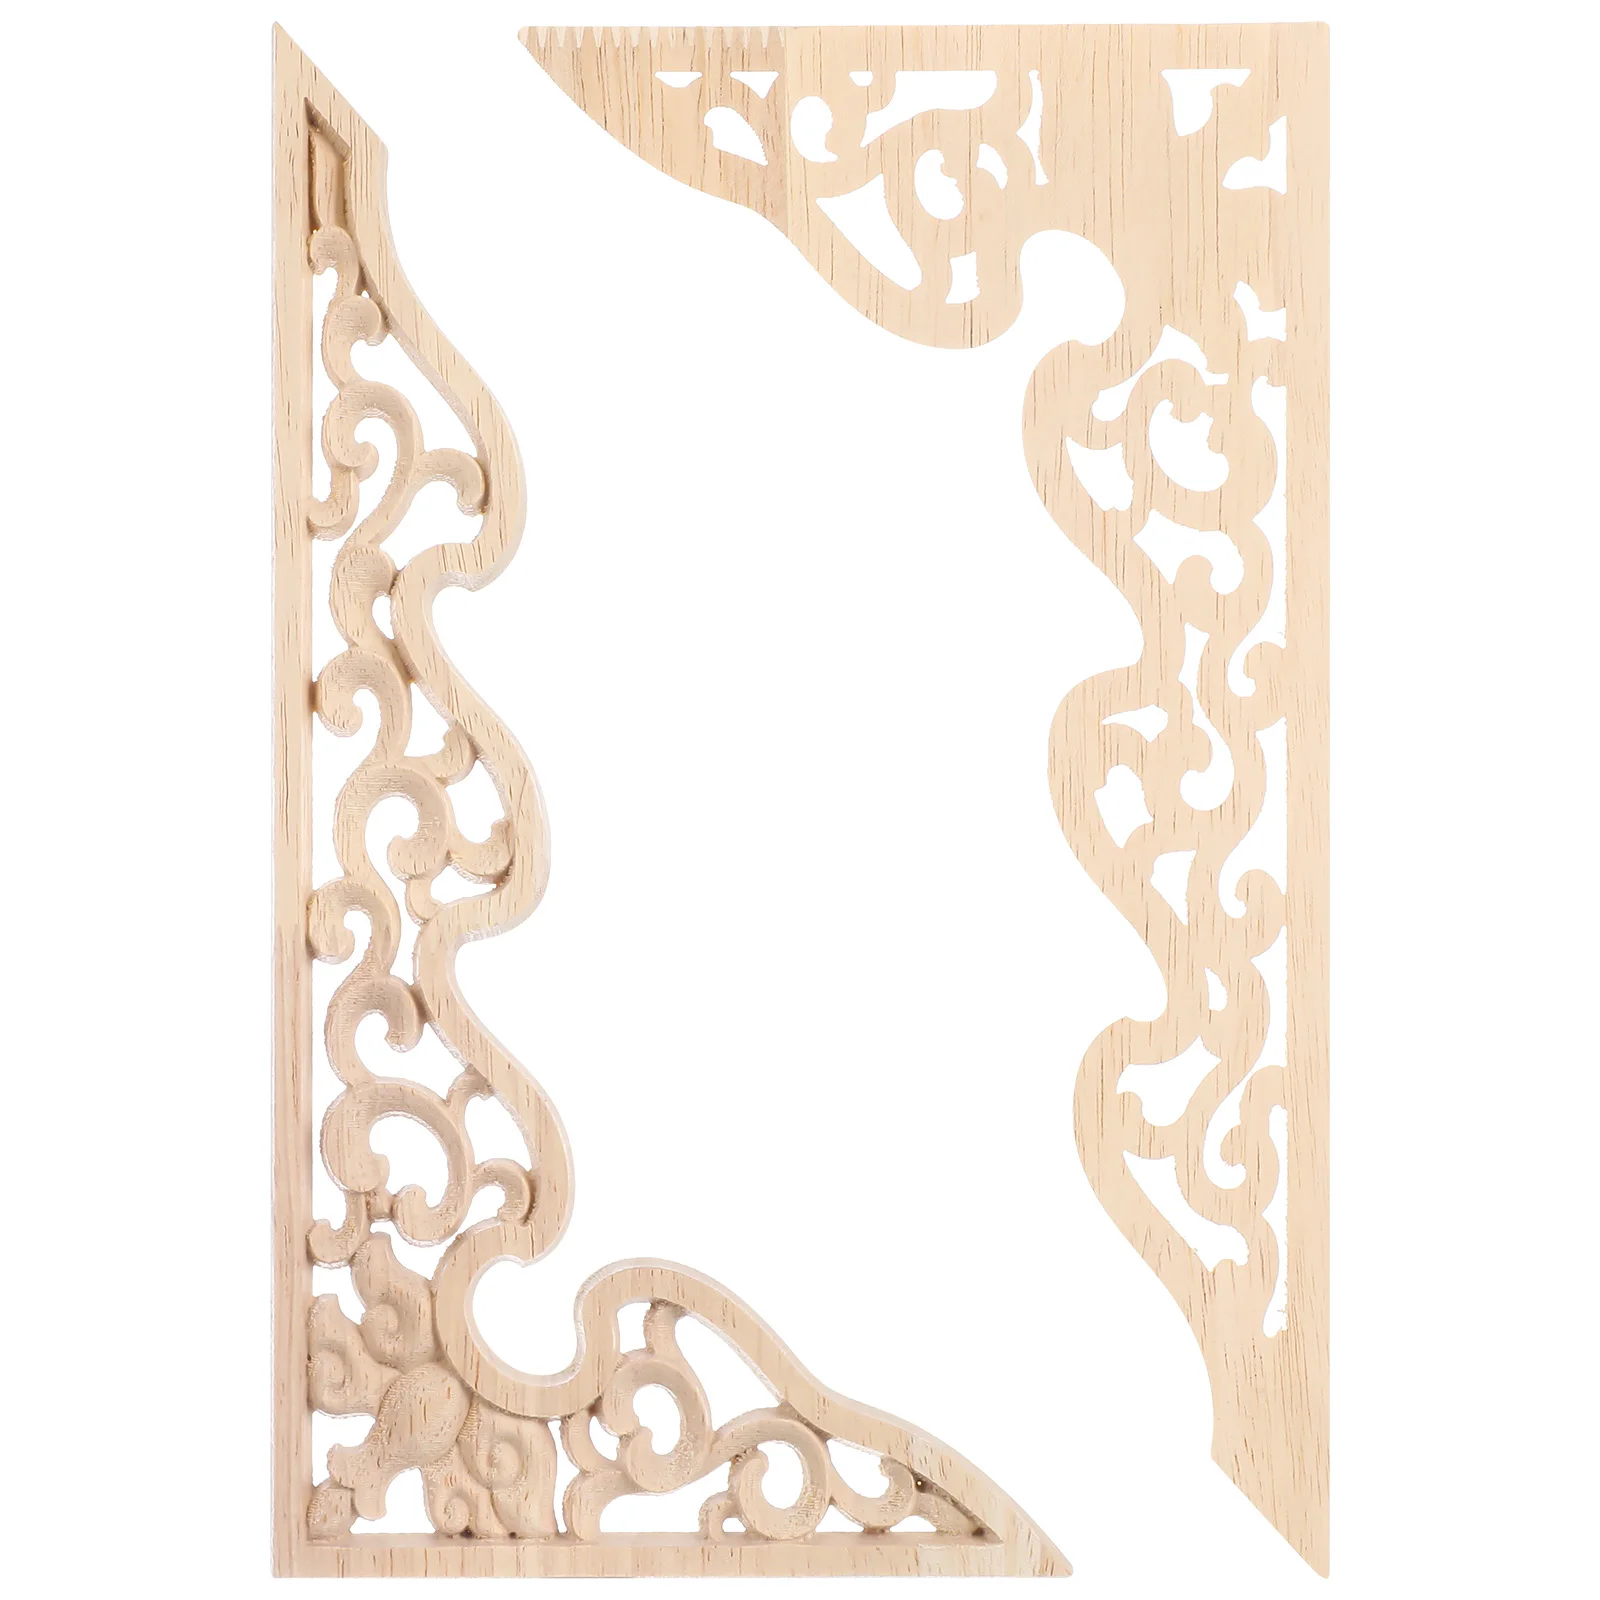 

Wood Carving Decals Furniture Unpainted Frame Chinese Style Carved Onlay Wooden Applique Bed Door Decor